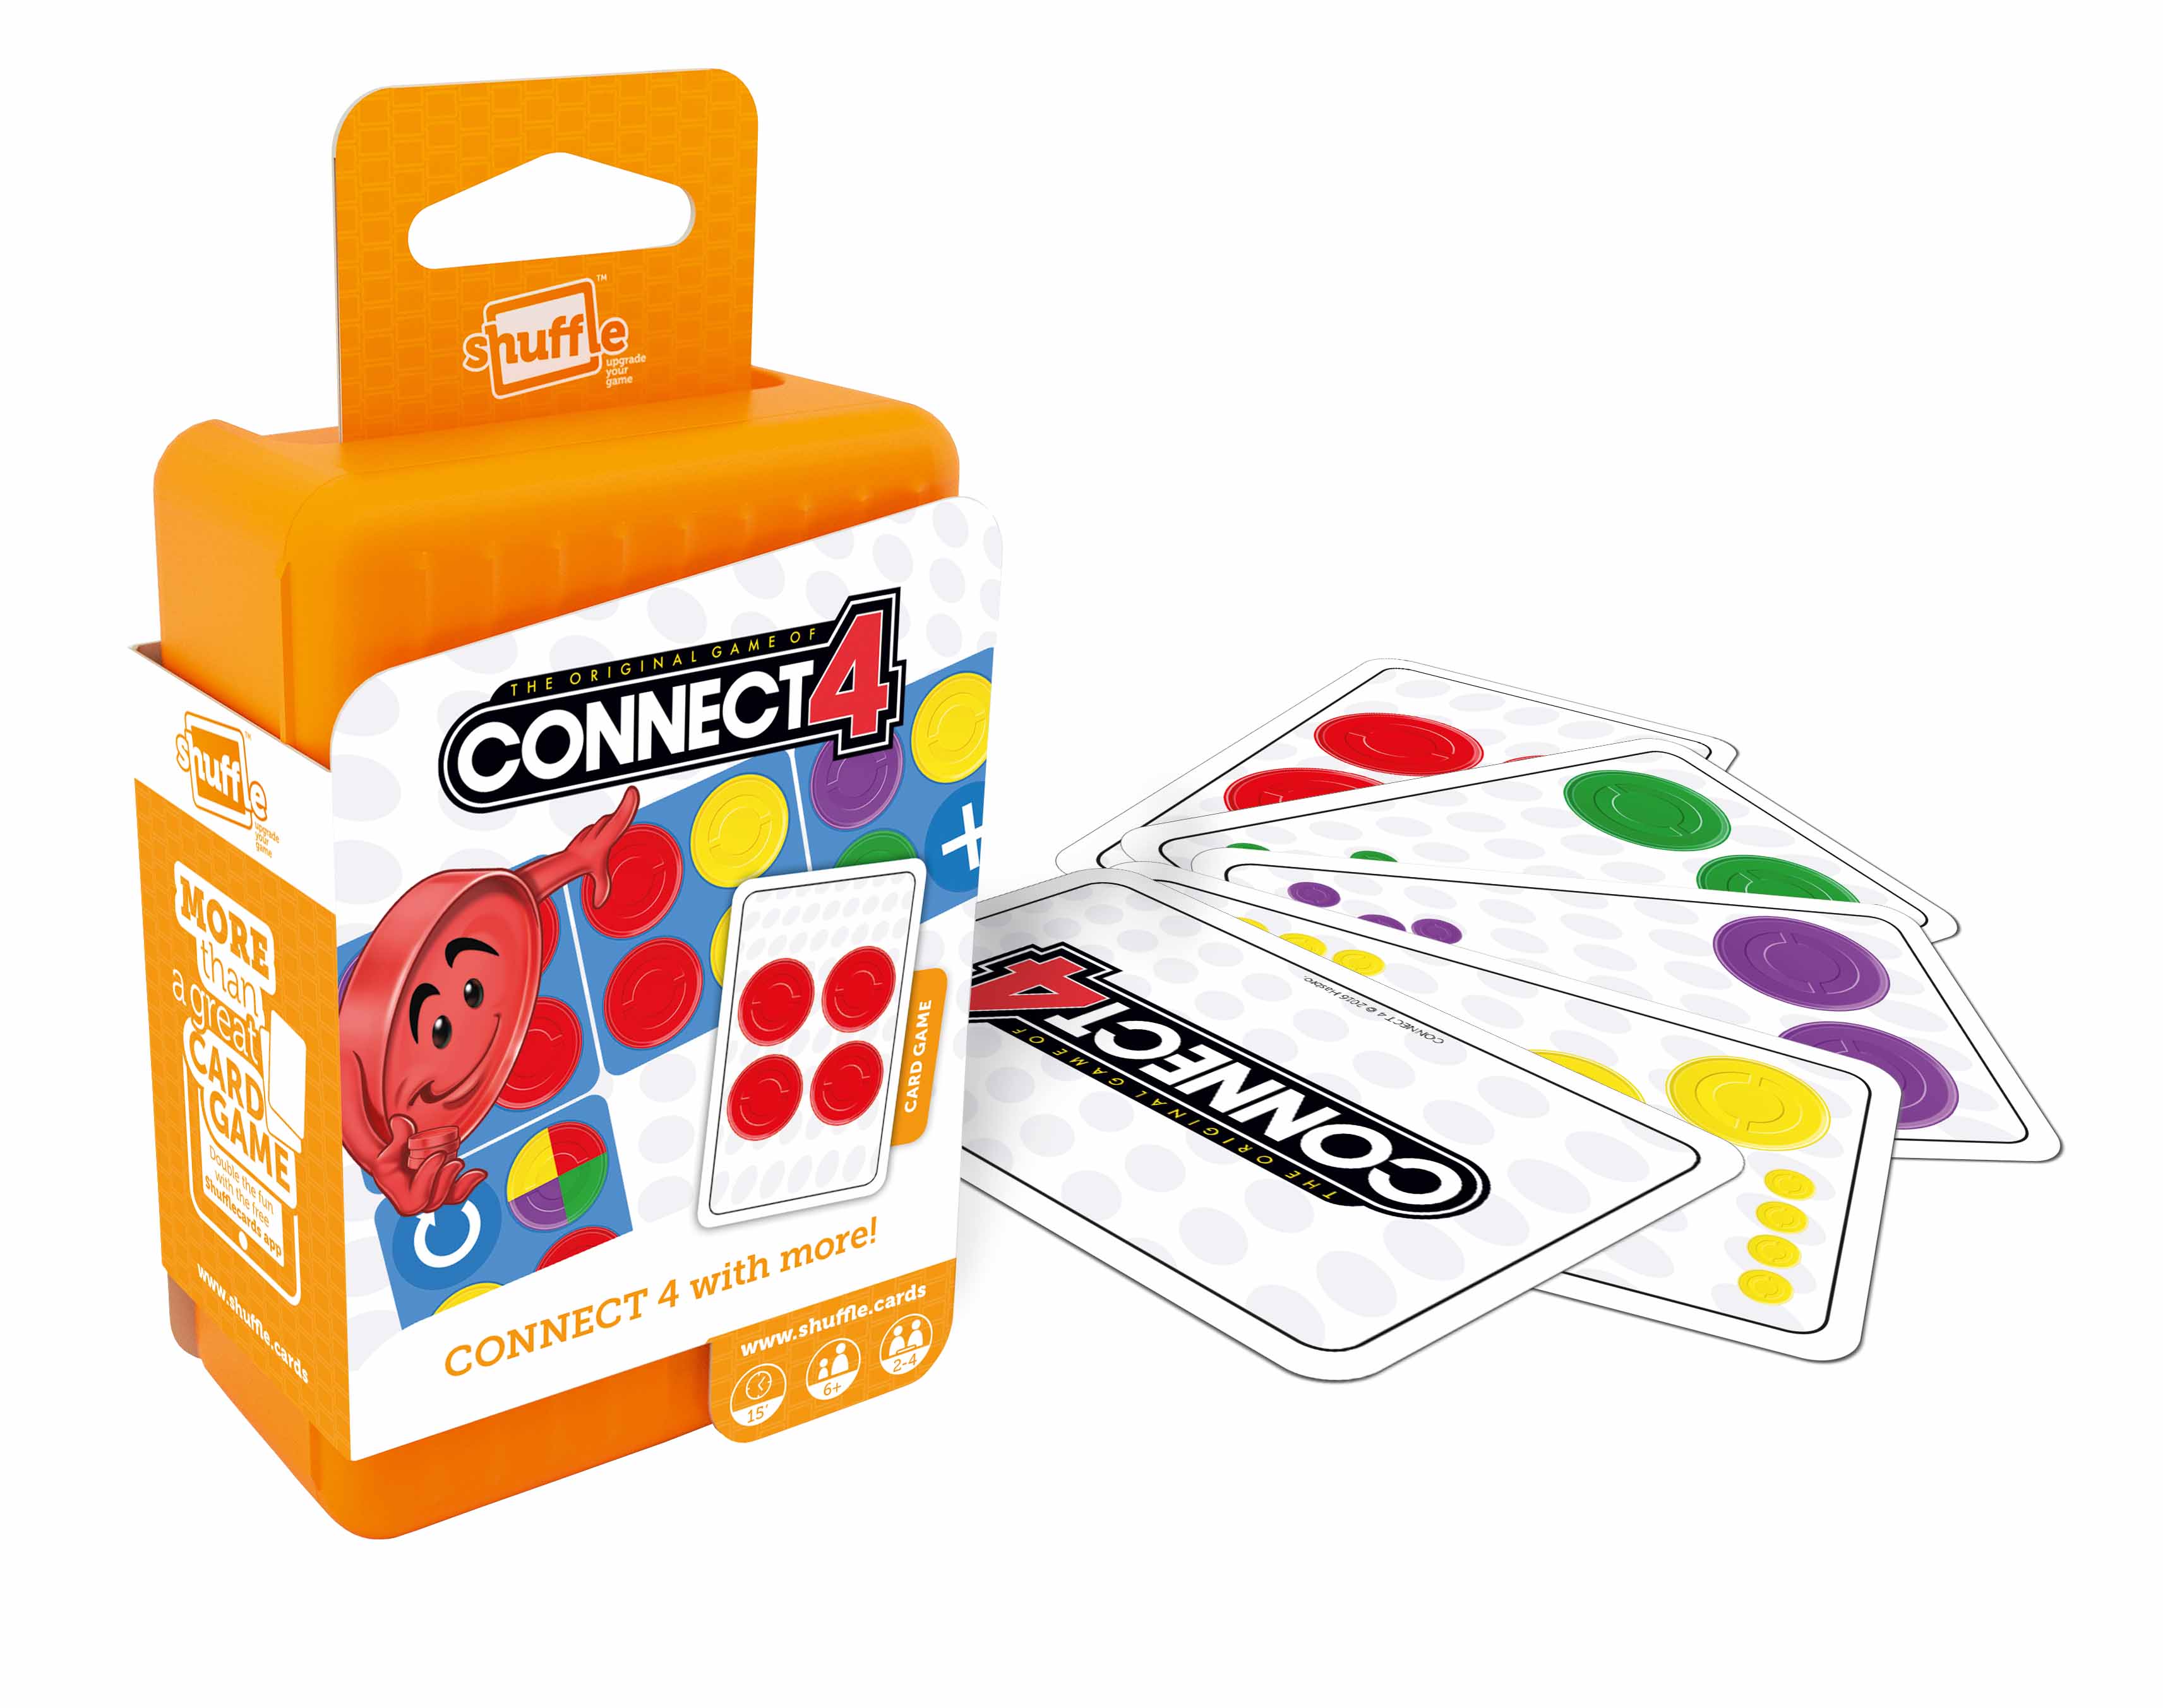 This card connect